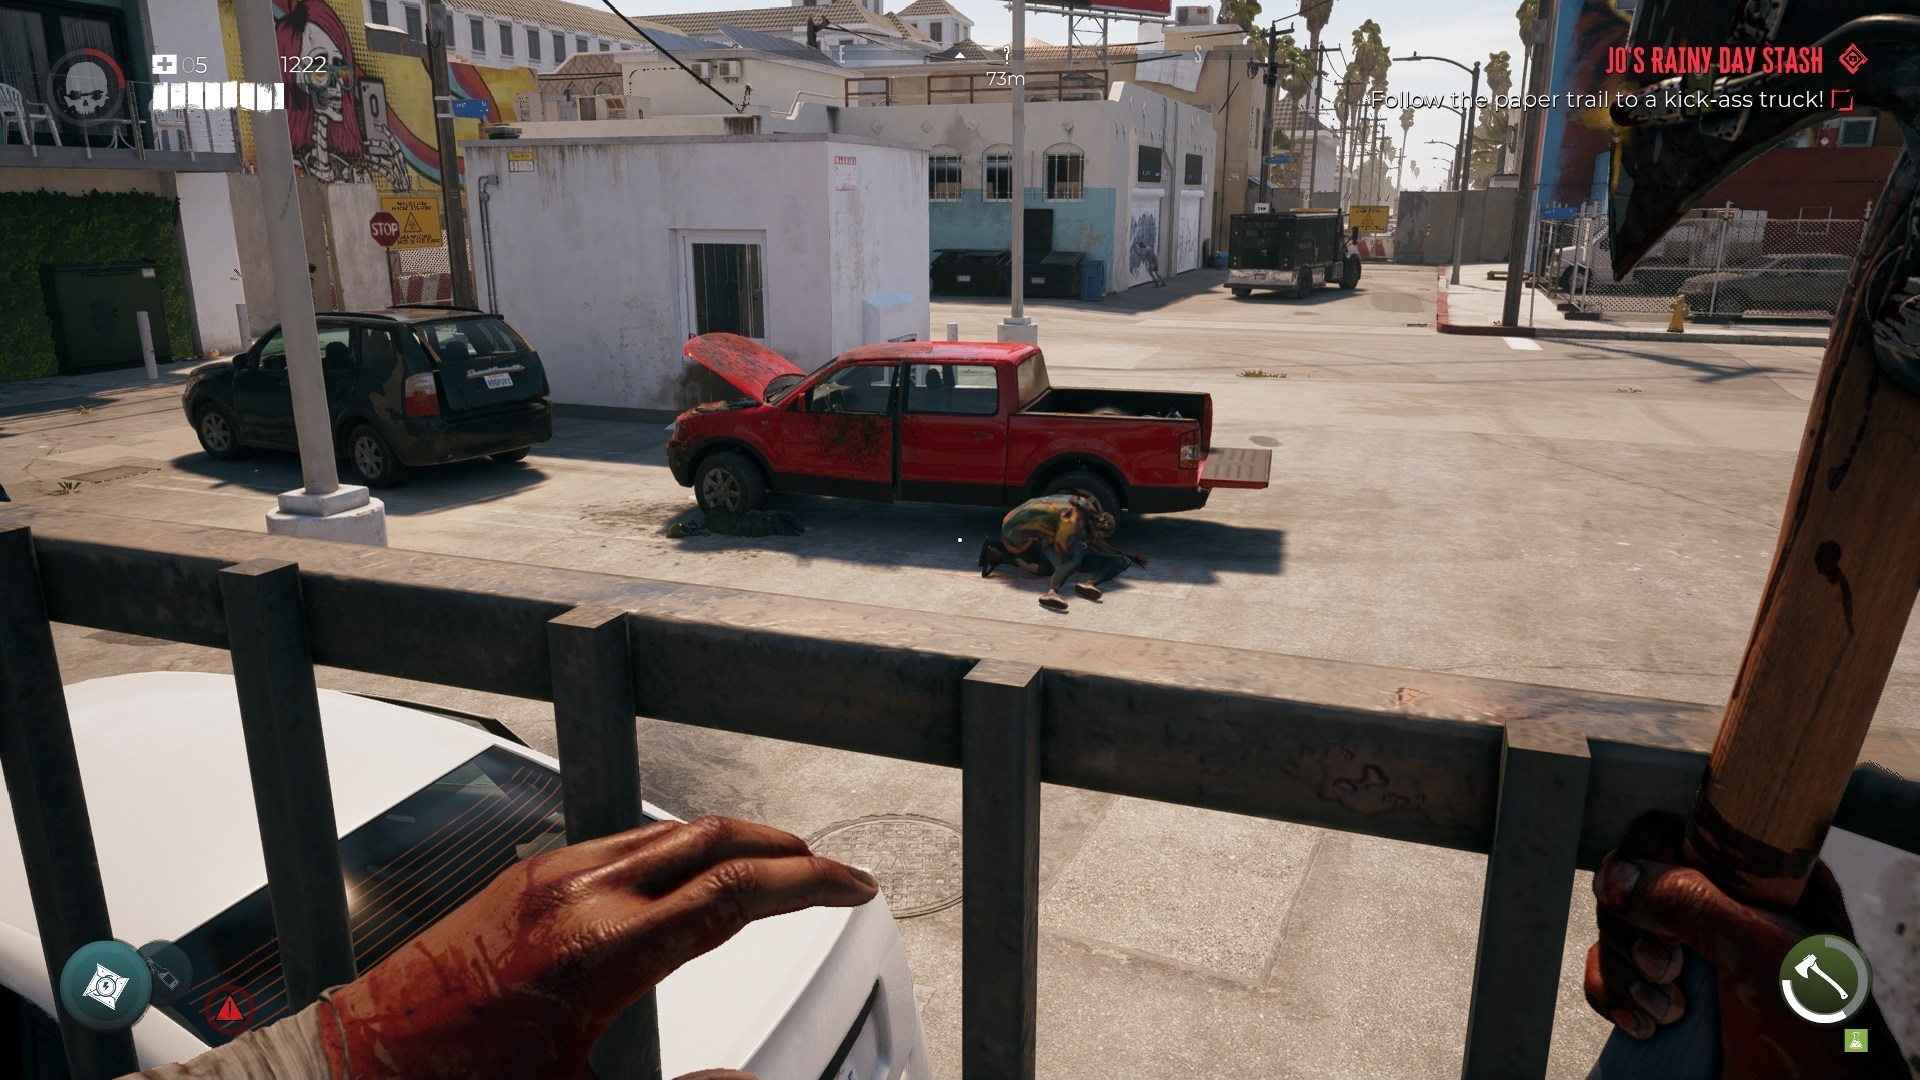 Dead Island 2 screenshot showing zombies huddled around a red van on a chain link fence